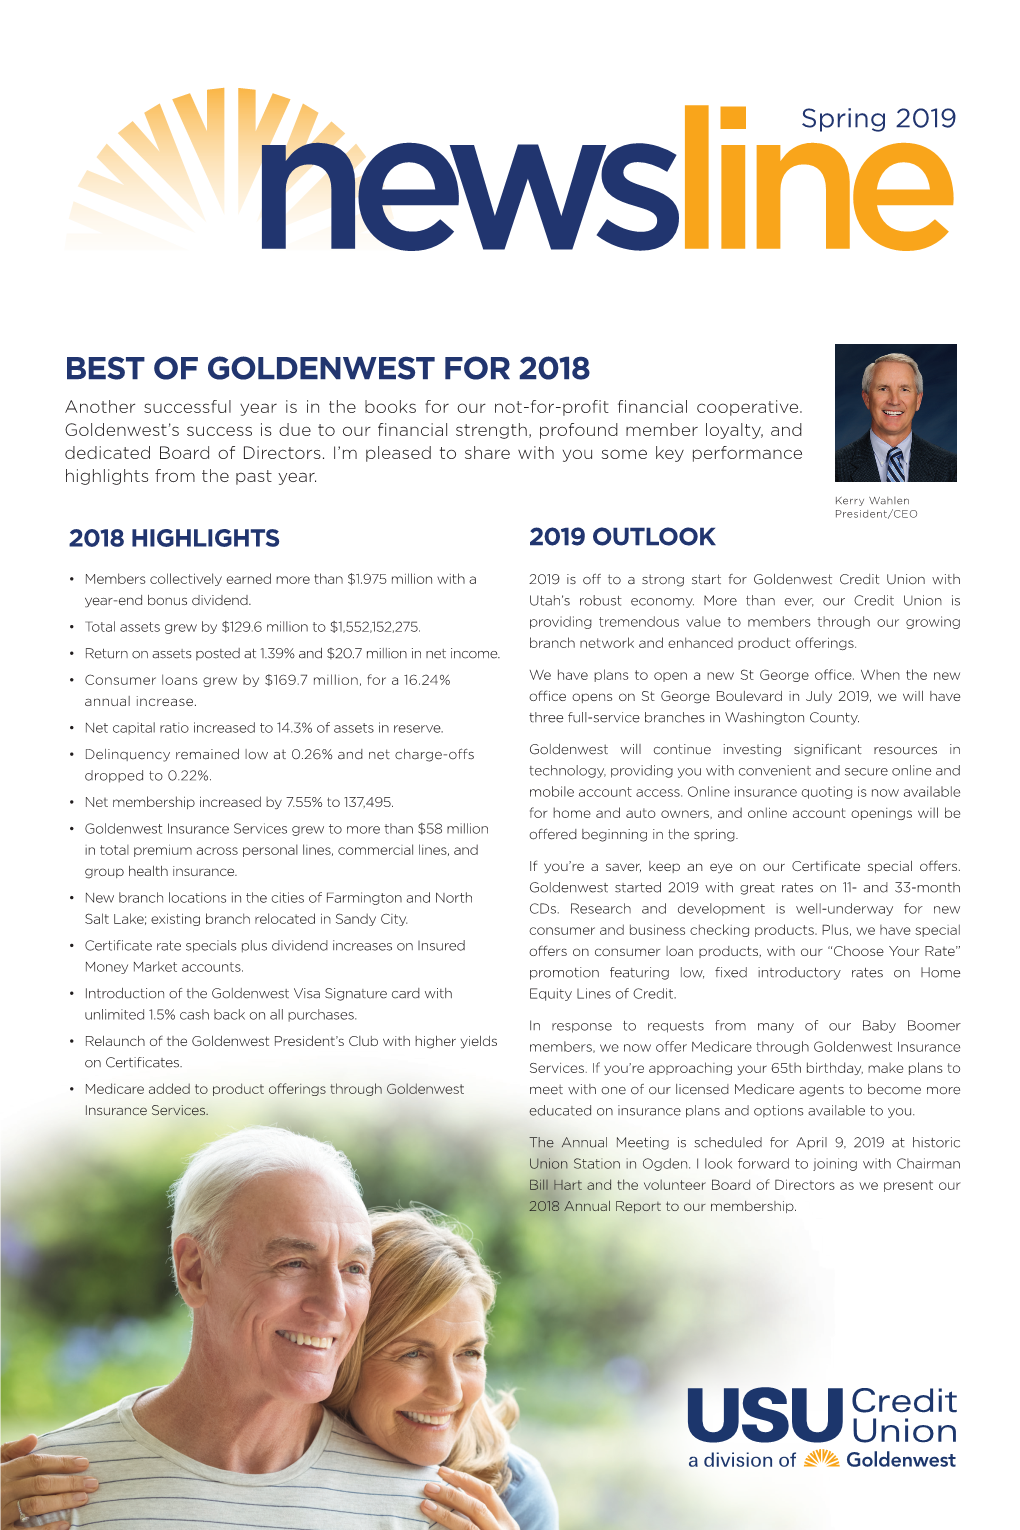 BEST of GOLDENWEST for 2018 Another Successful Year Is in the Books for Our Not-For-Proﬁt ﬁnancial Cooperative